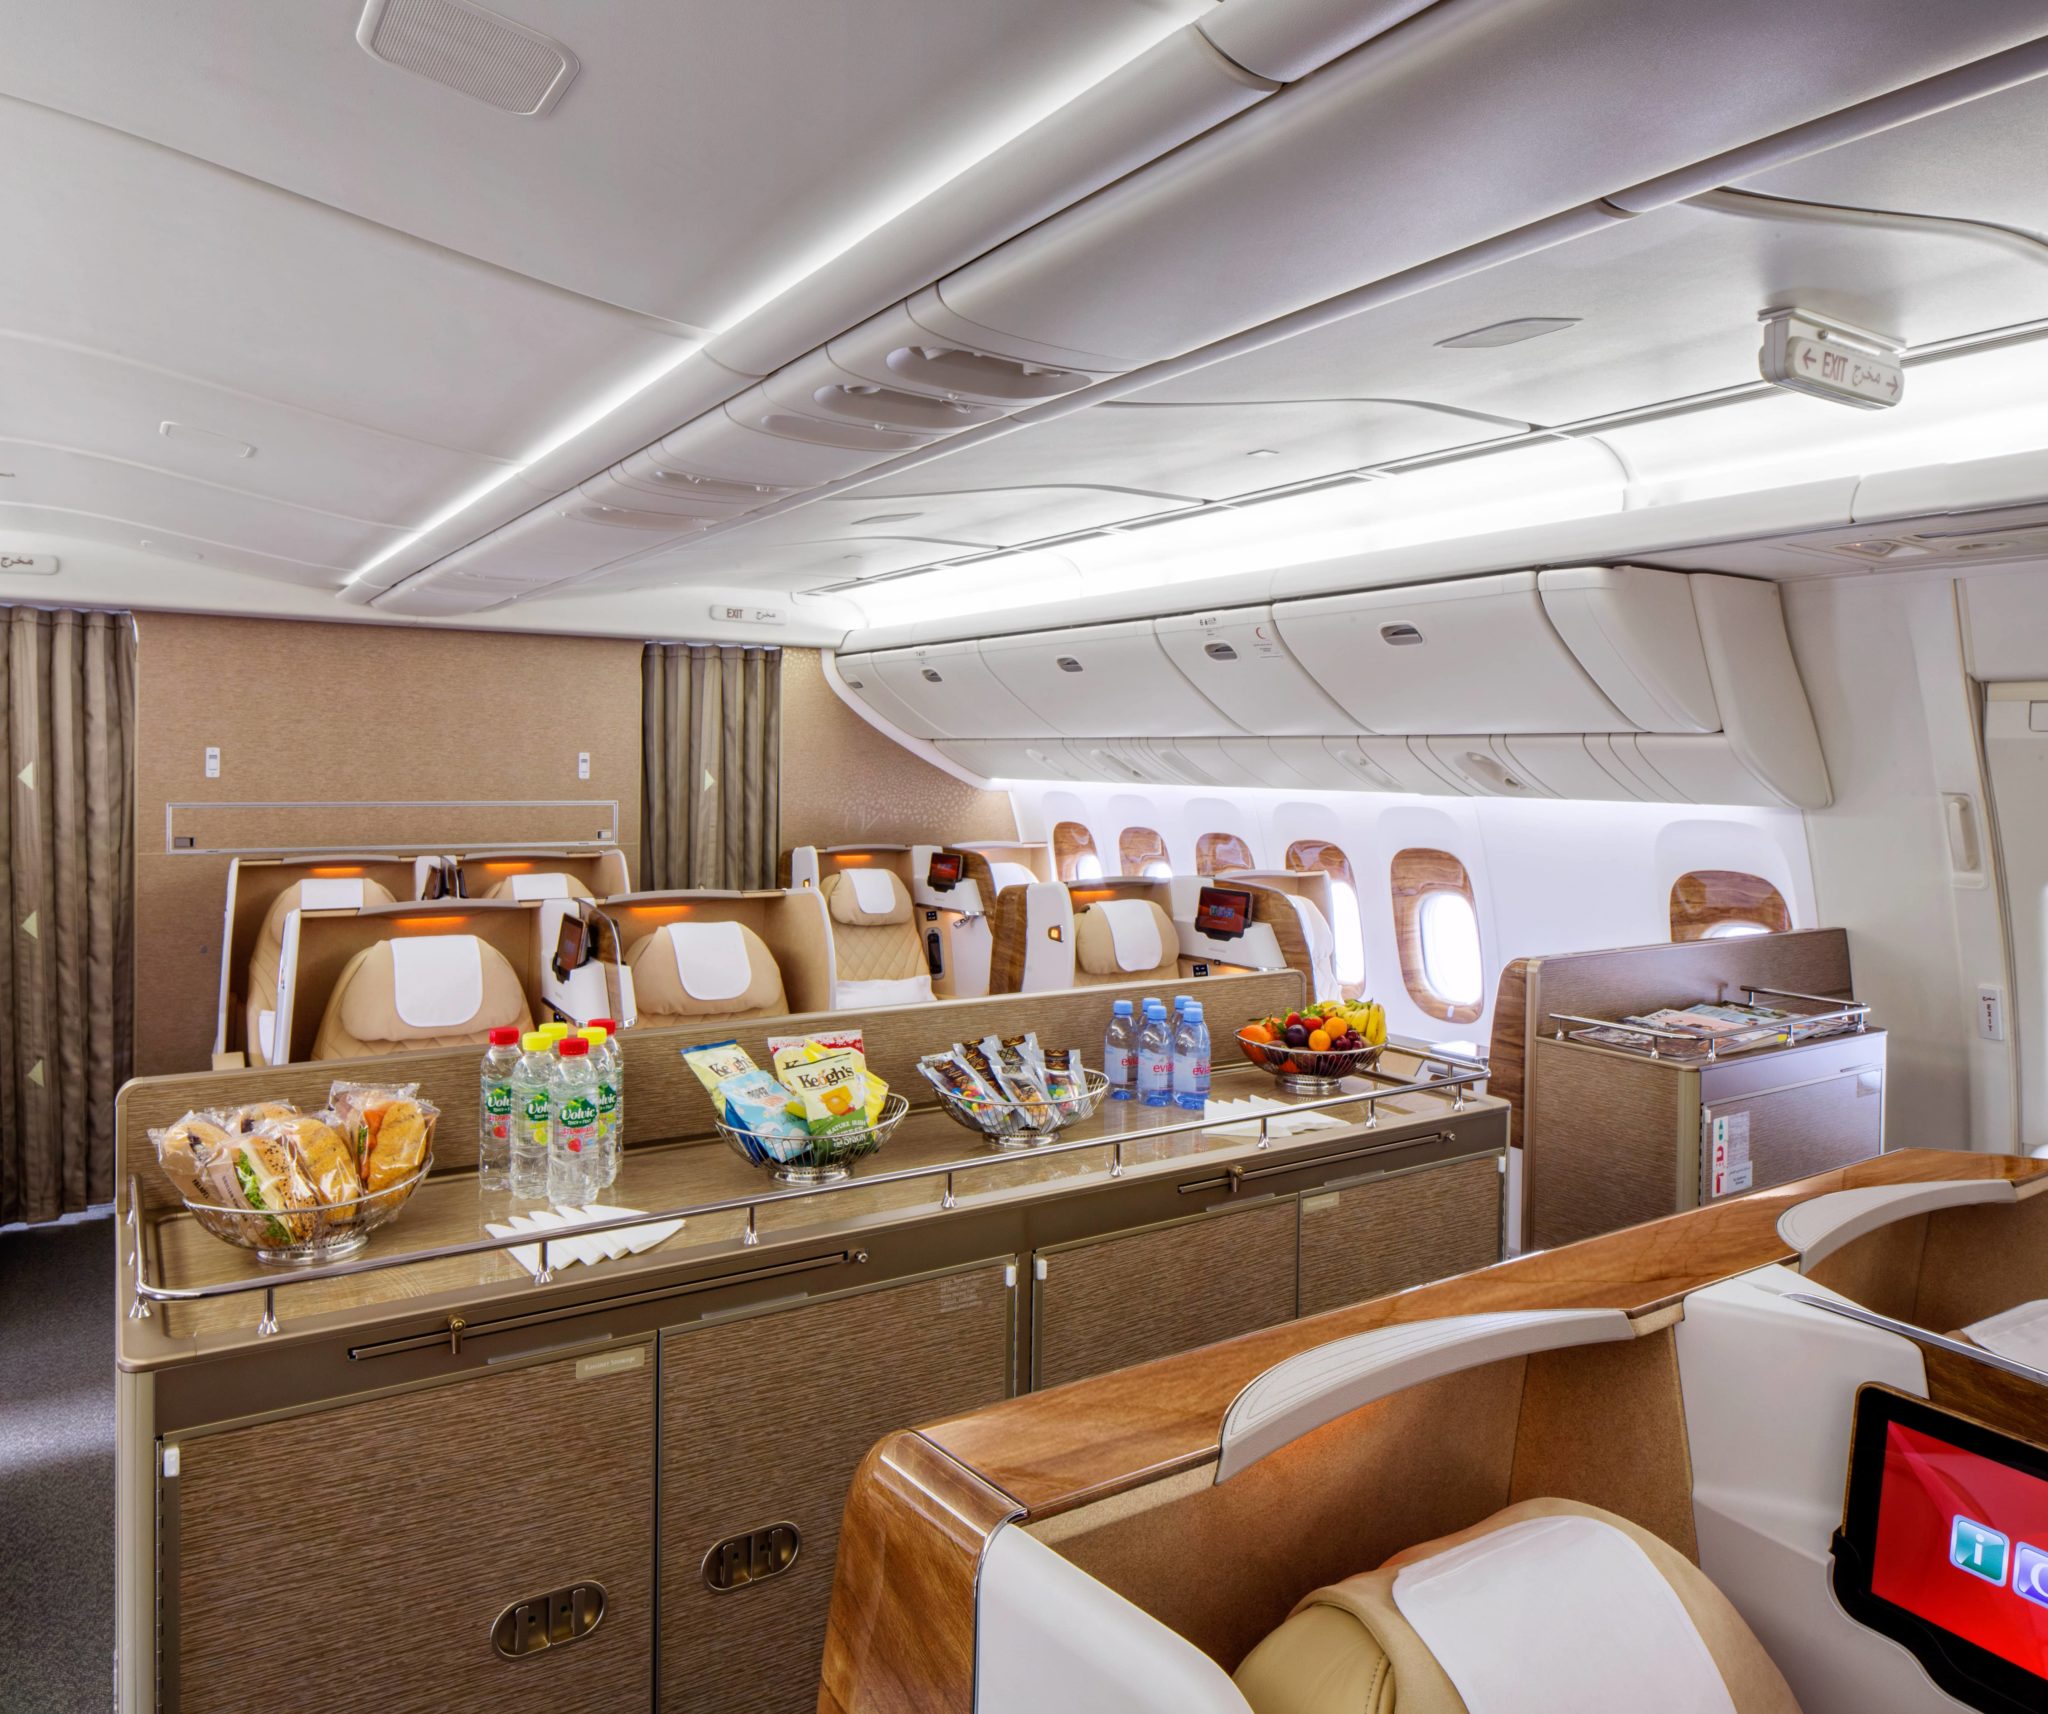 Emirates unveils new business class layout for their Boeing 777200LR